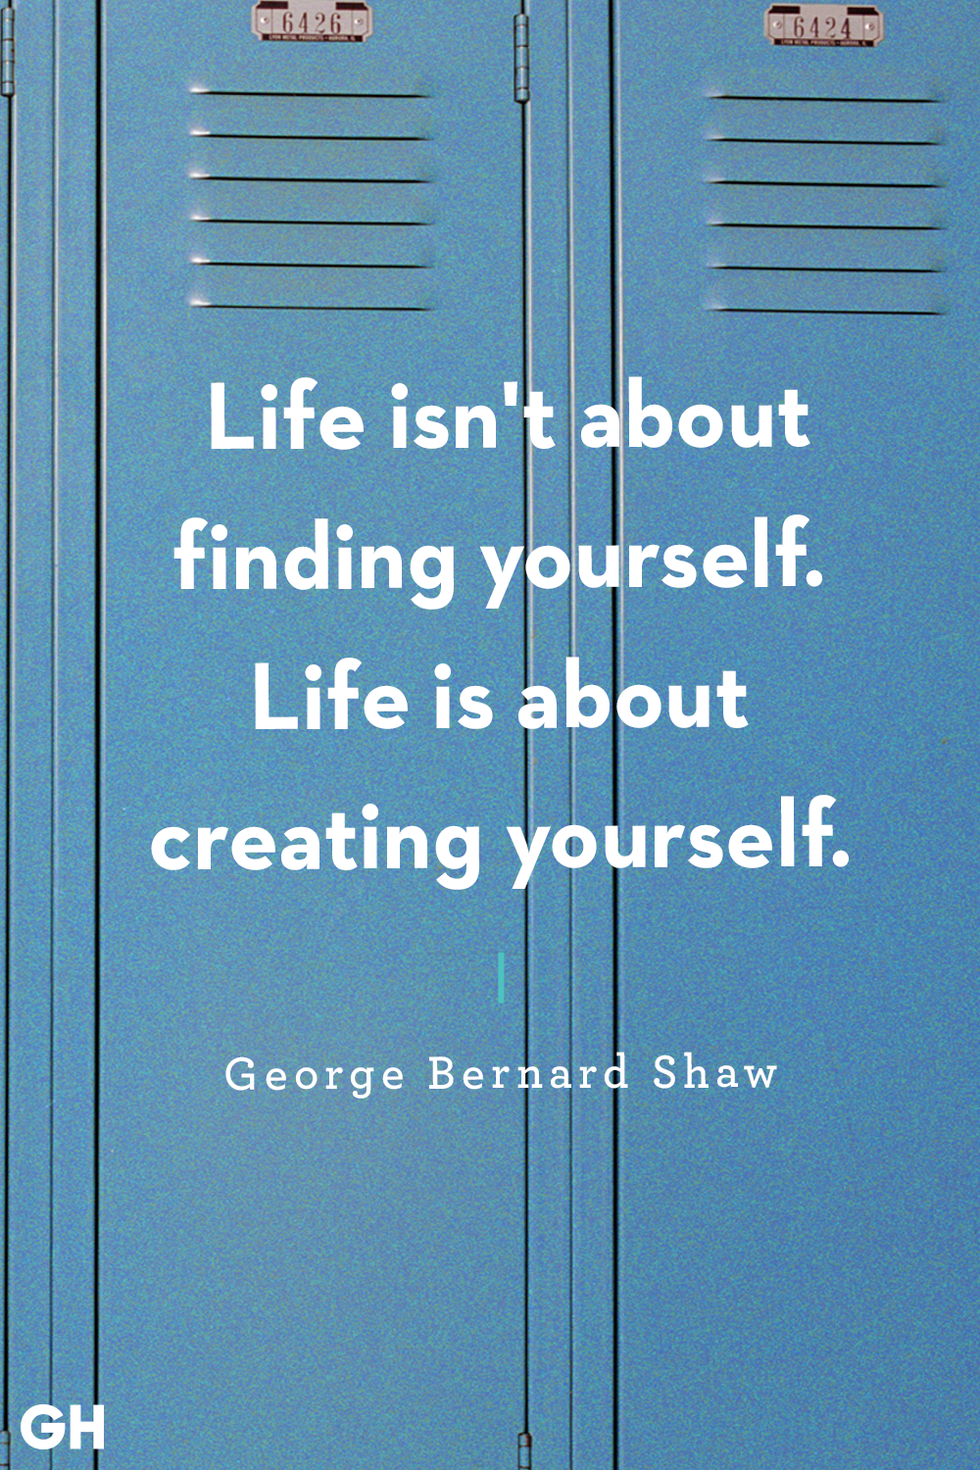 https://hips.hearstapps.com/hmg-prod/images/back-to-school-quotes-george-bernard-shaw-1657645317.png?crop=1xw:1xh;center,top&resize=980:*